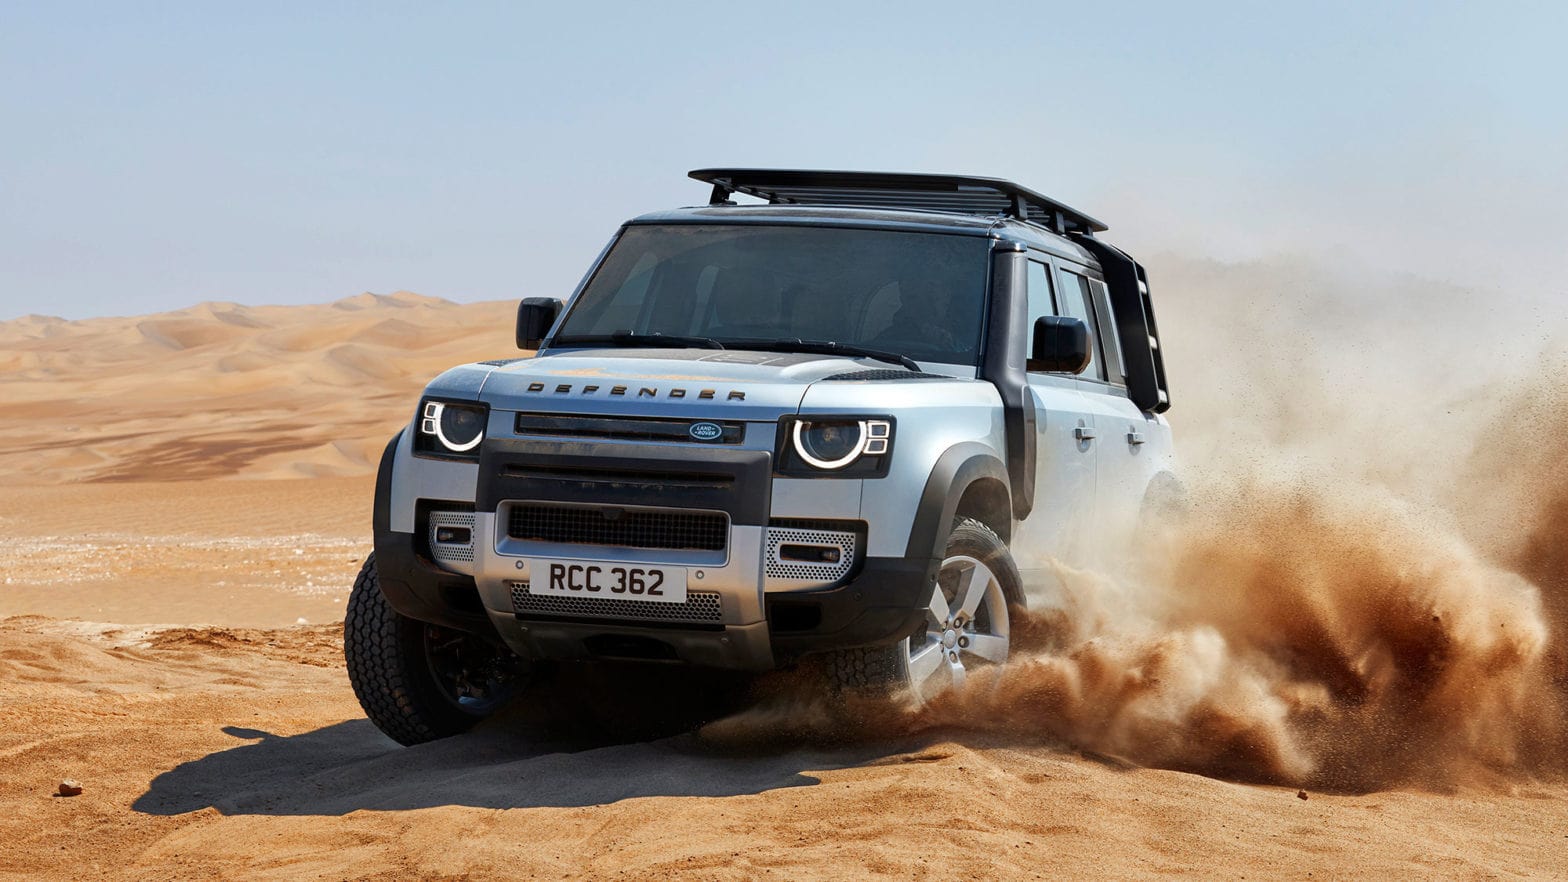 2020-Land-Rover-Defender-Featured-image-1568x882-min